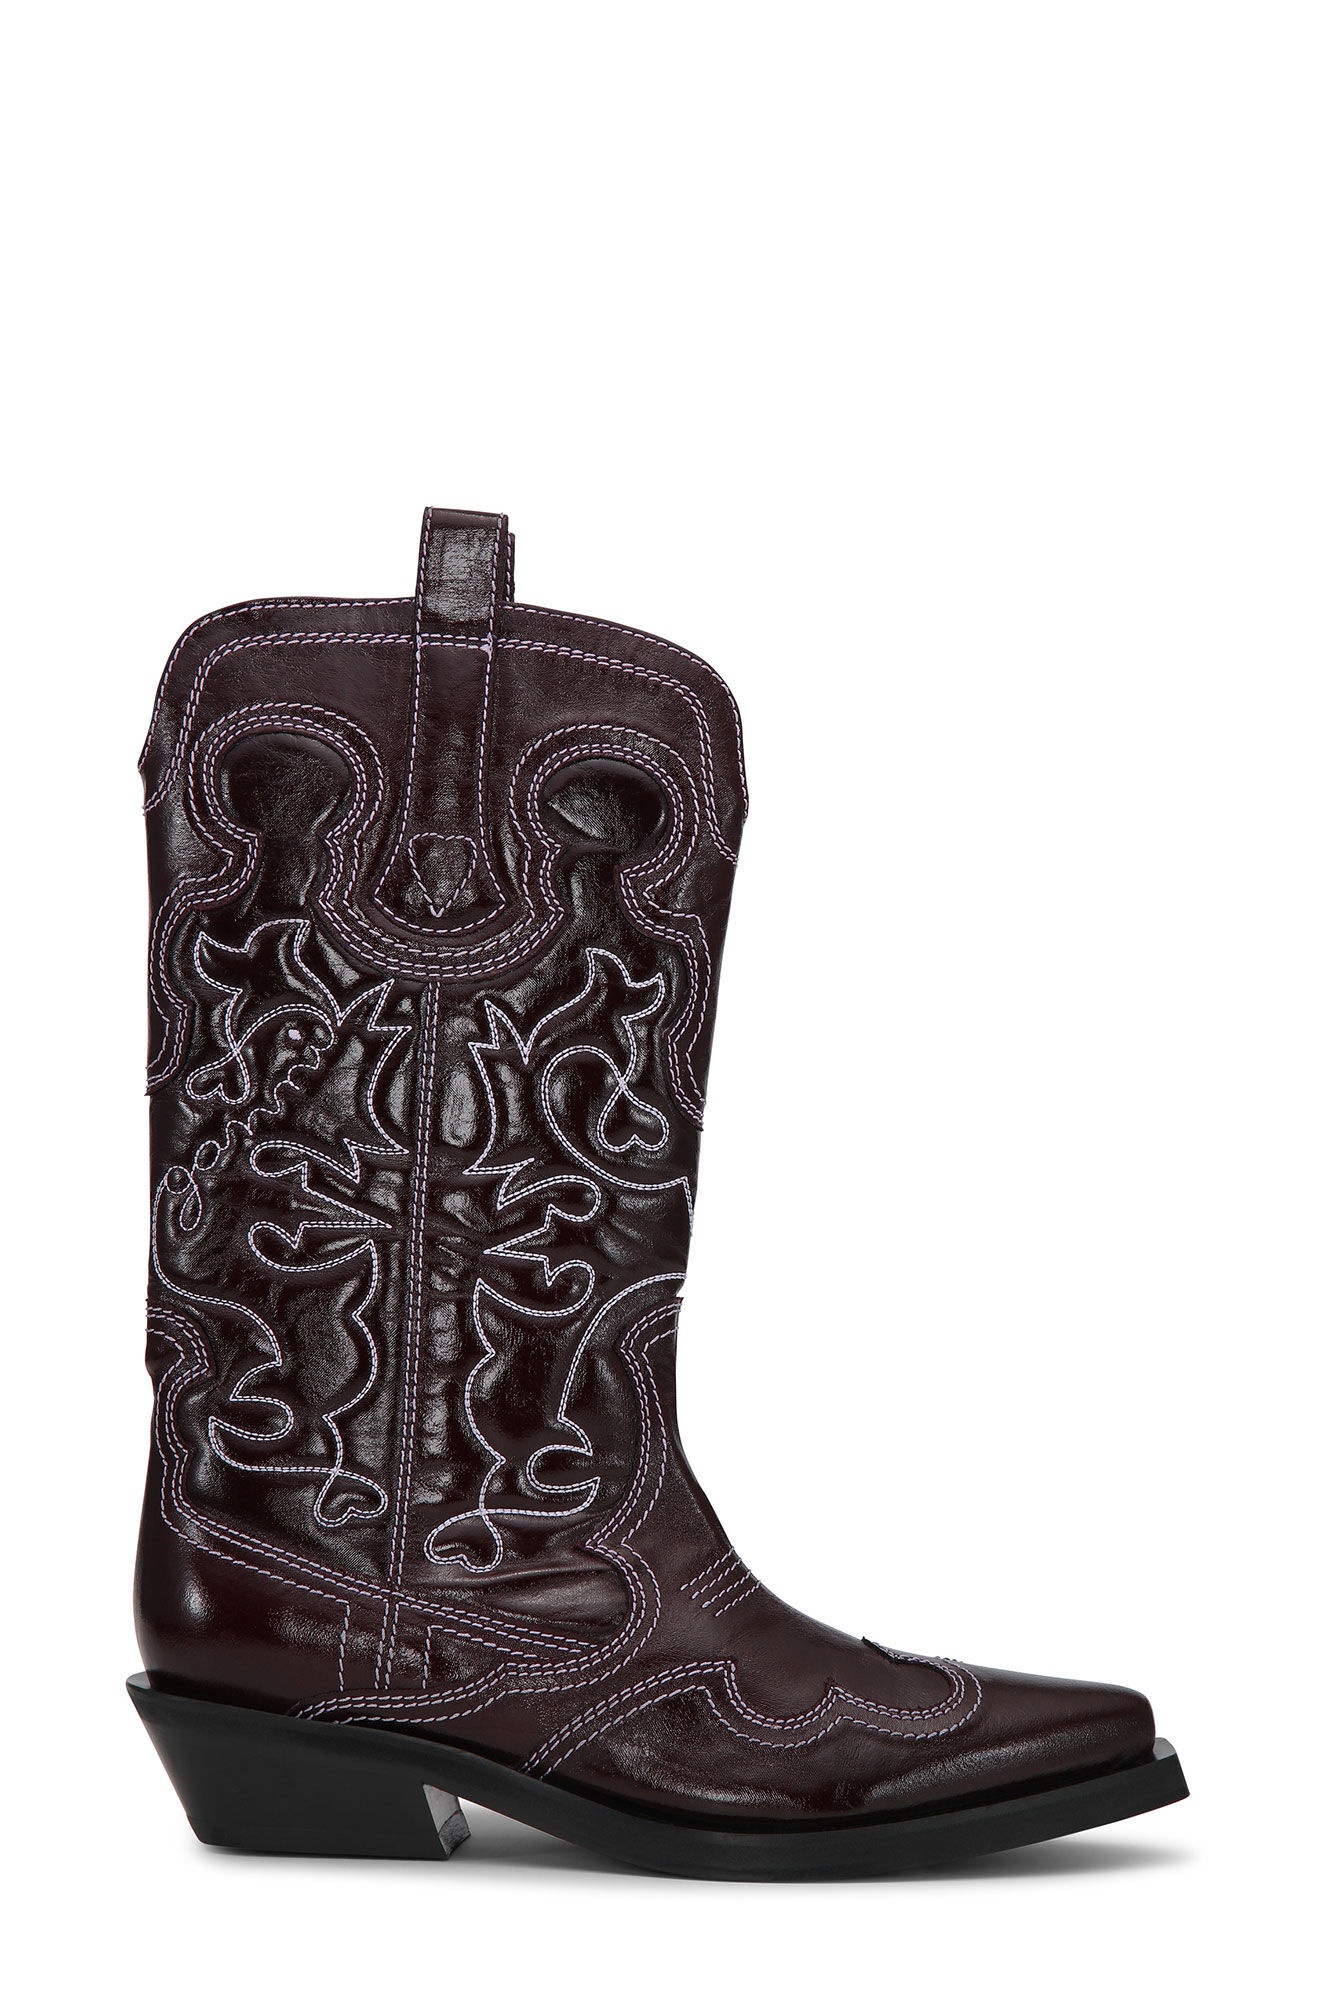 BURGUNDY MID SHAFT EMBROIDERED WESTERN BOOTS - 1